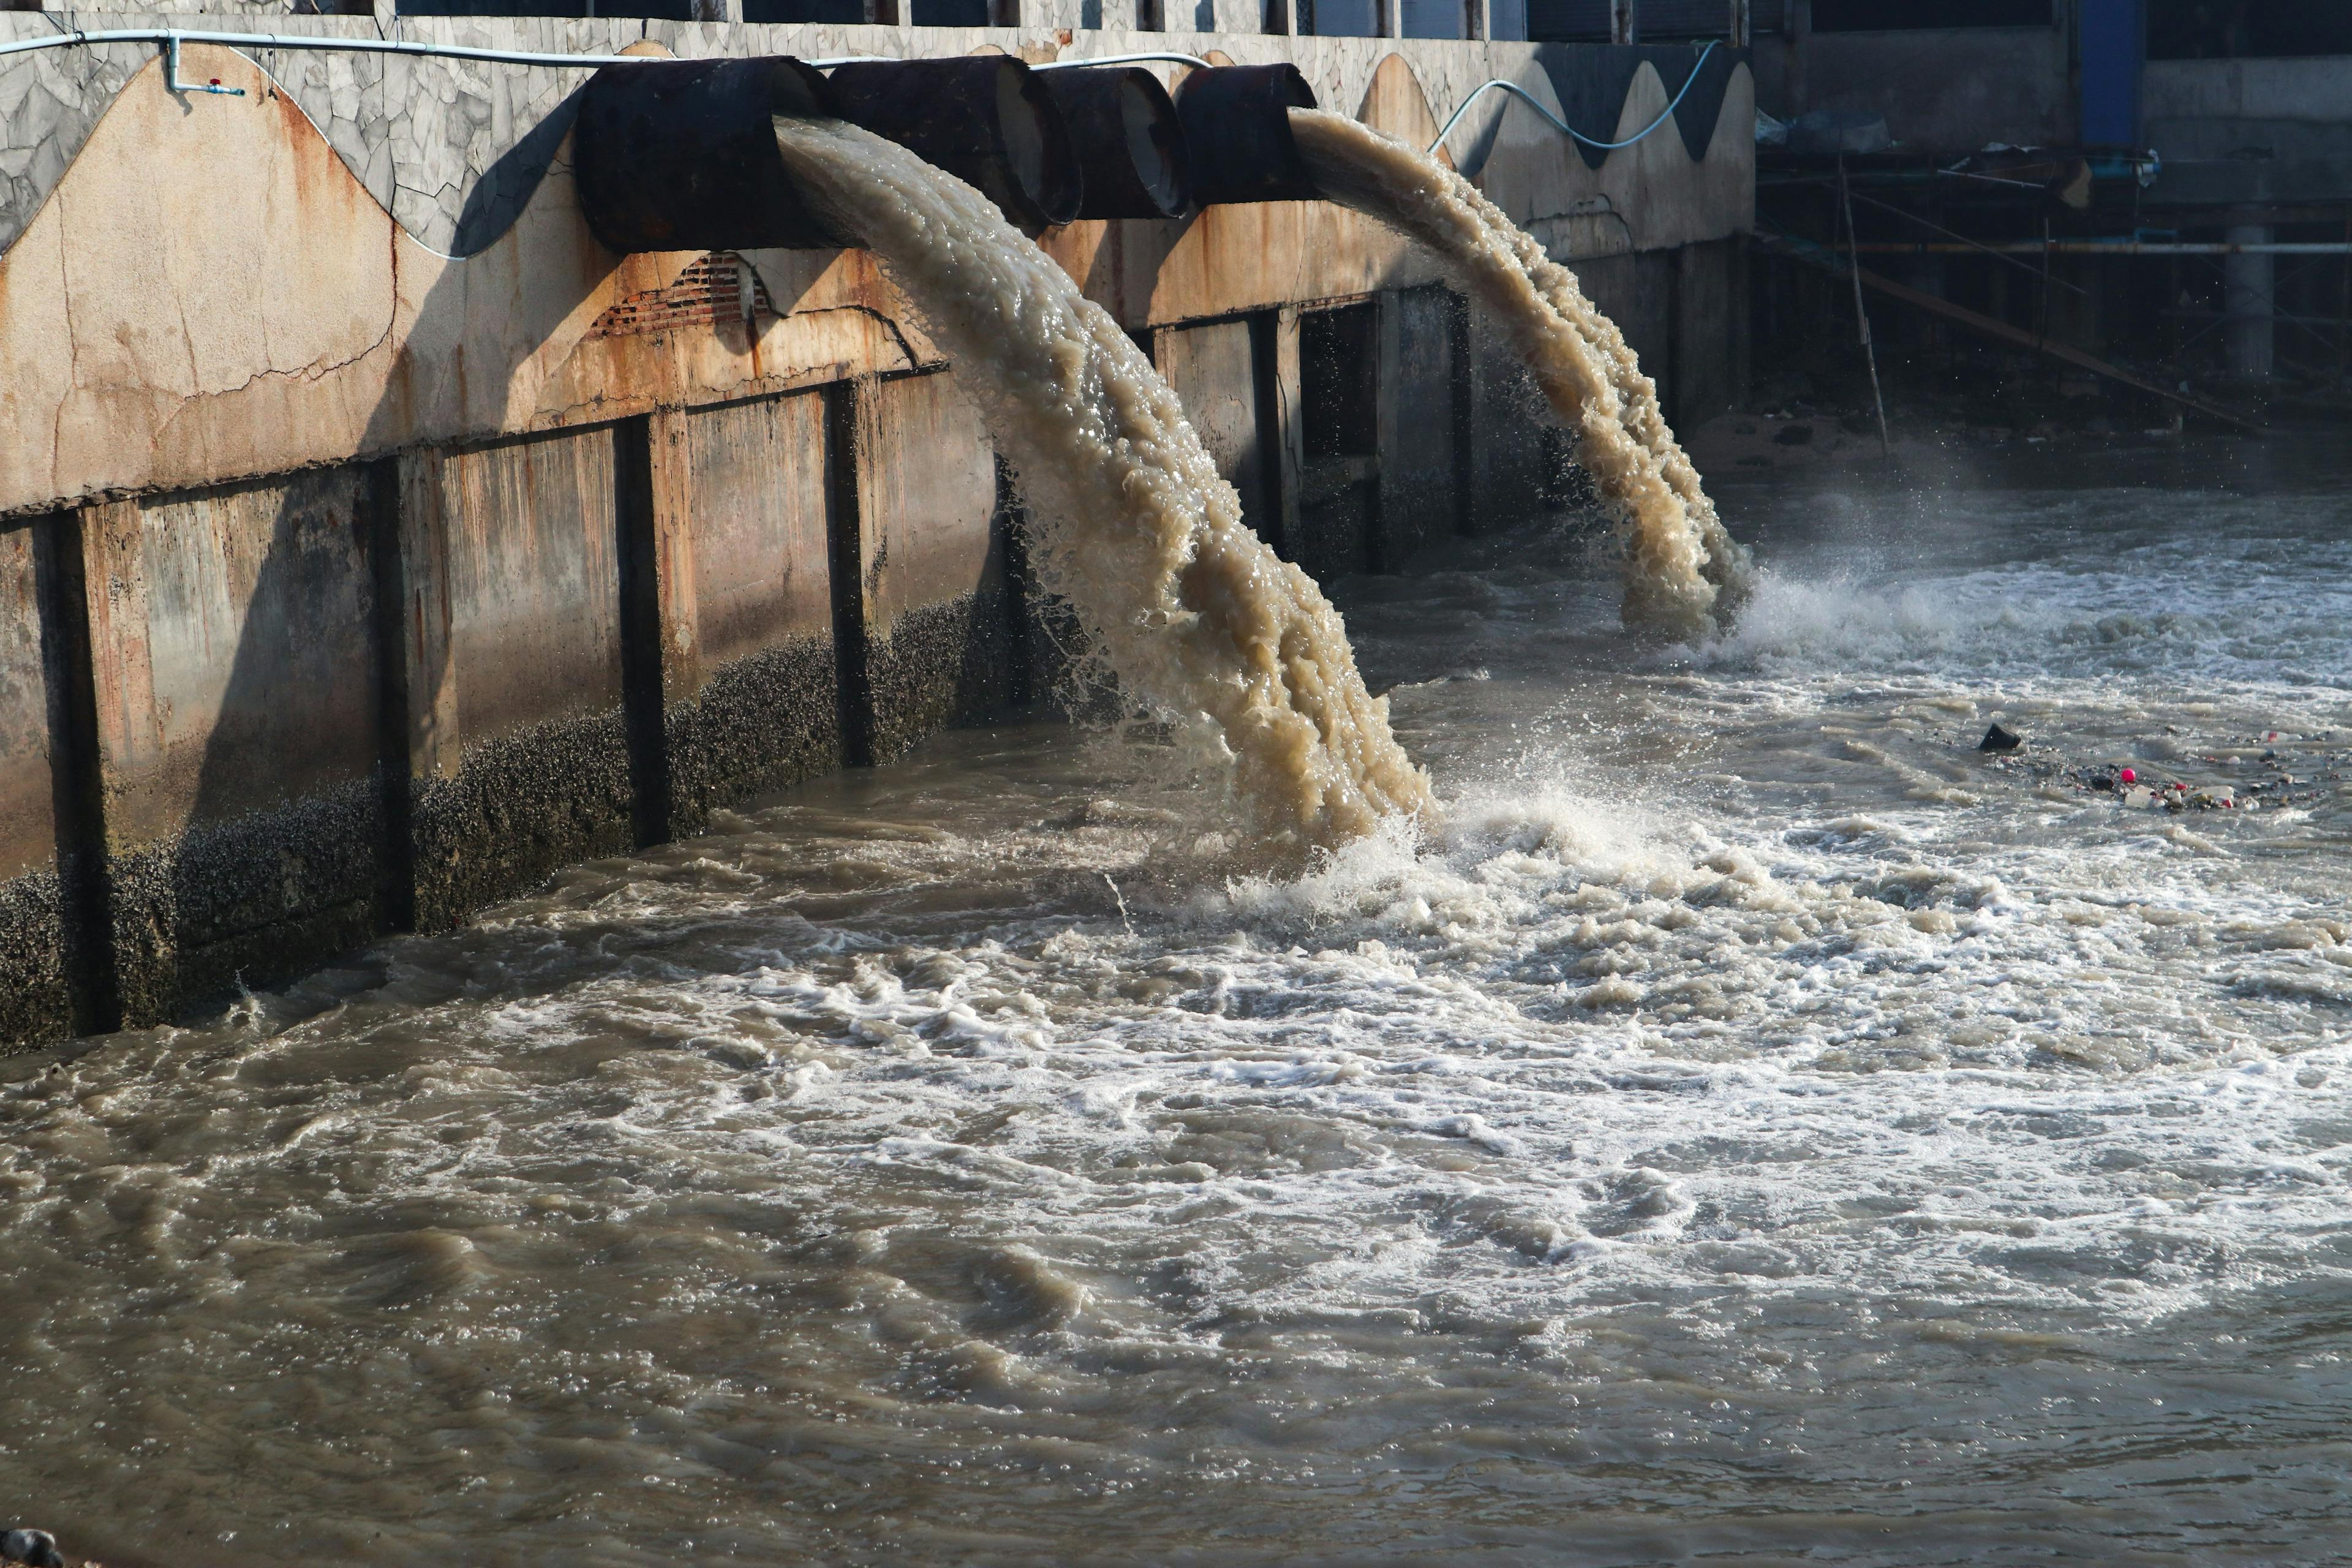 Industrial and factory waste water discharge pipe into the canal and sea, dirty water pollution | Image Credit: © Weerayuth - stock.adobe.com